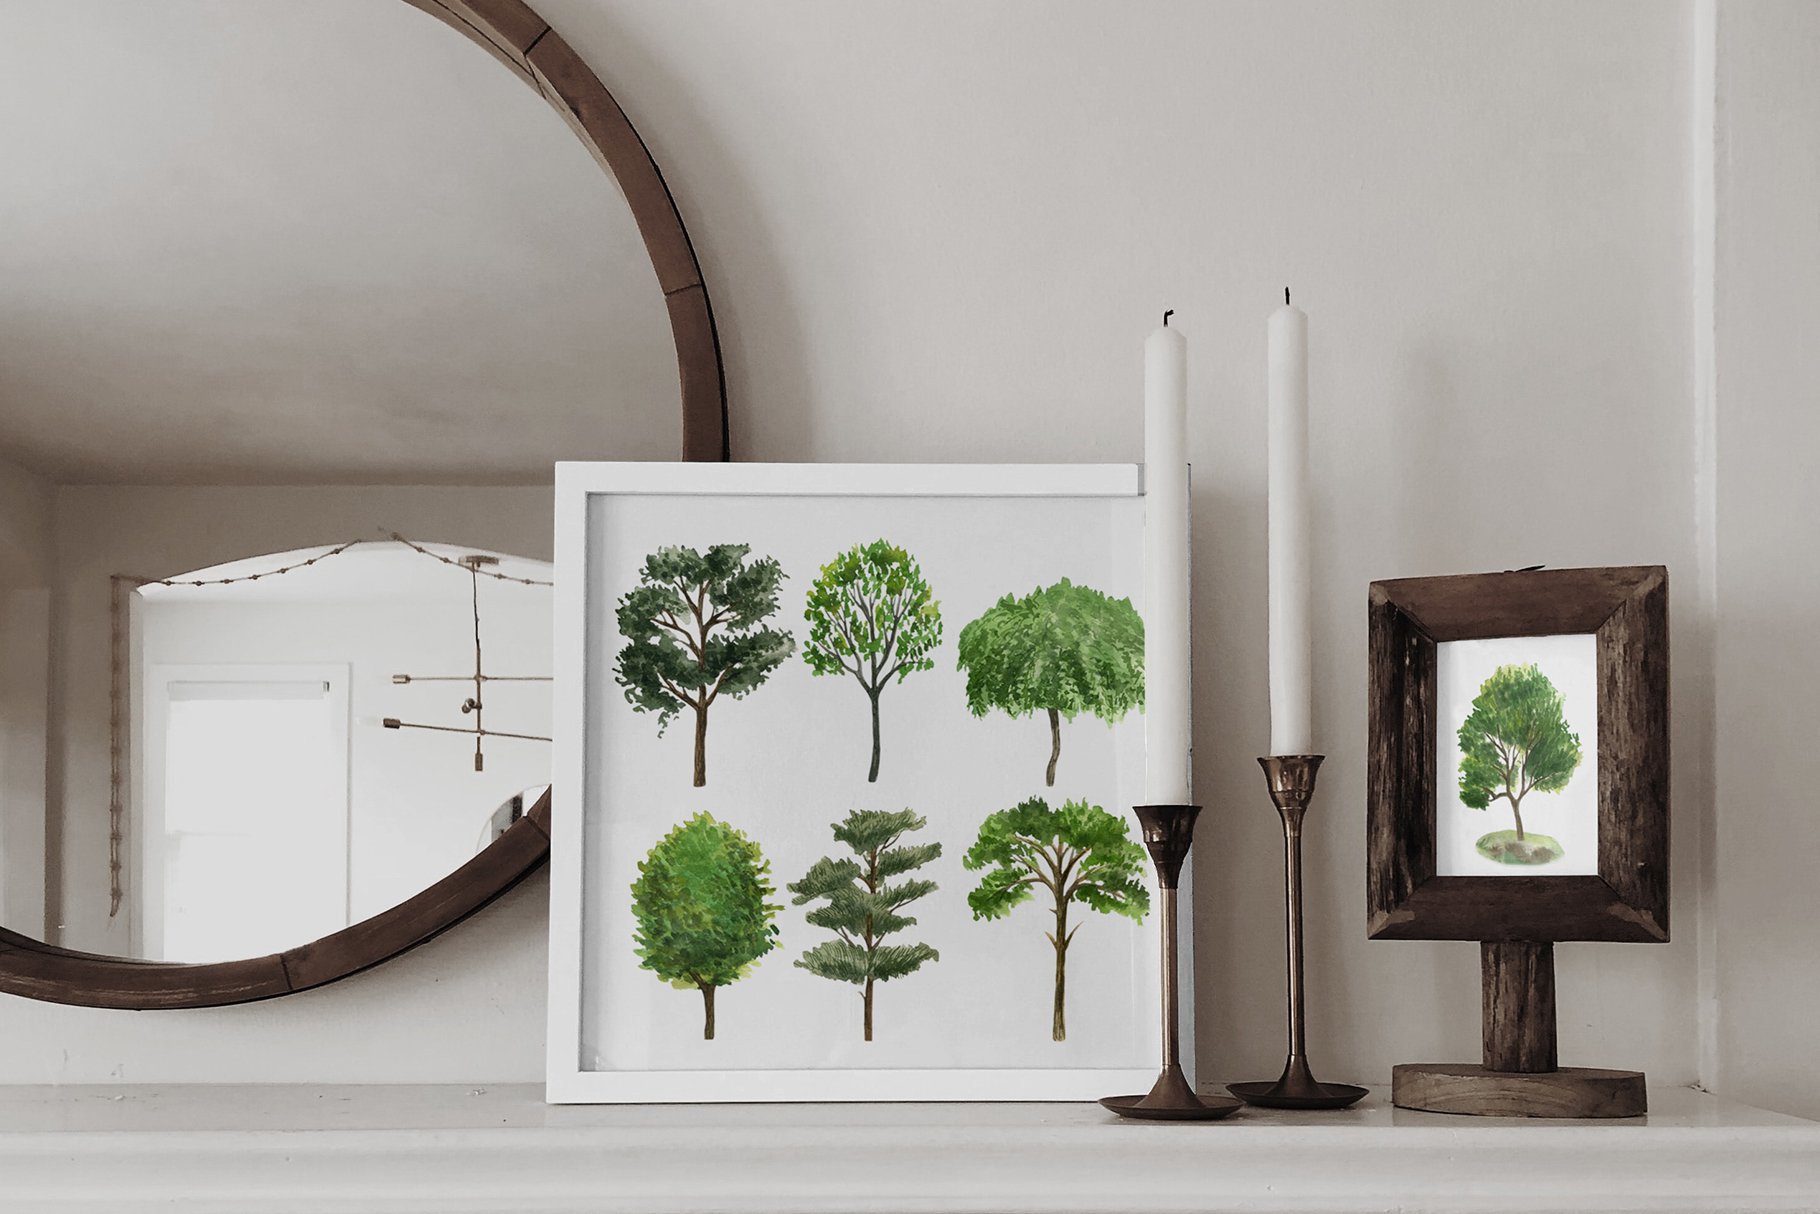 White mantle with a mirror and a picture of trees.